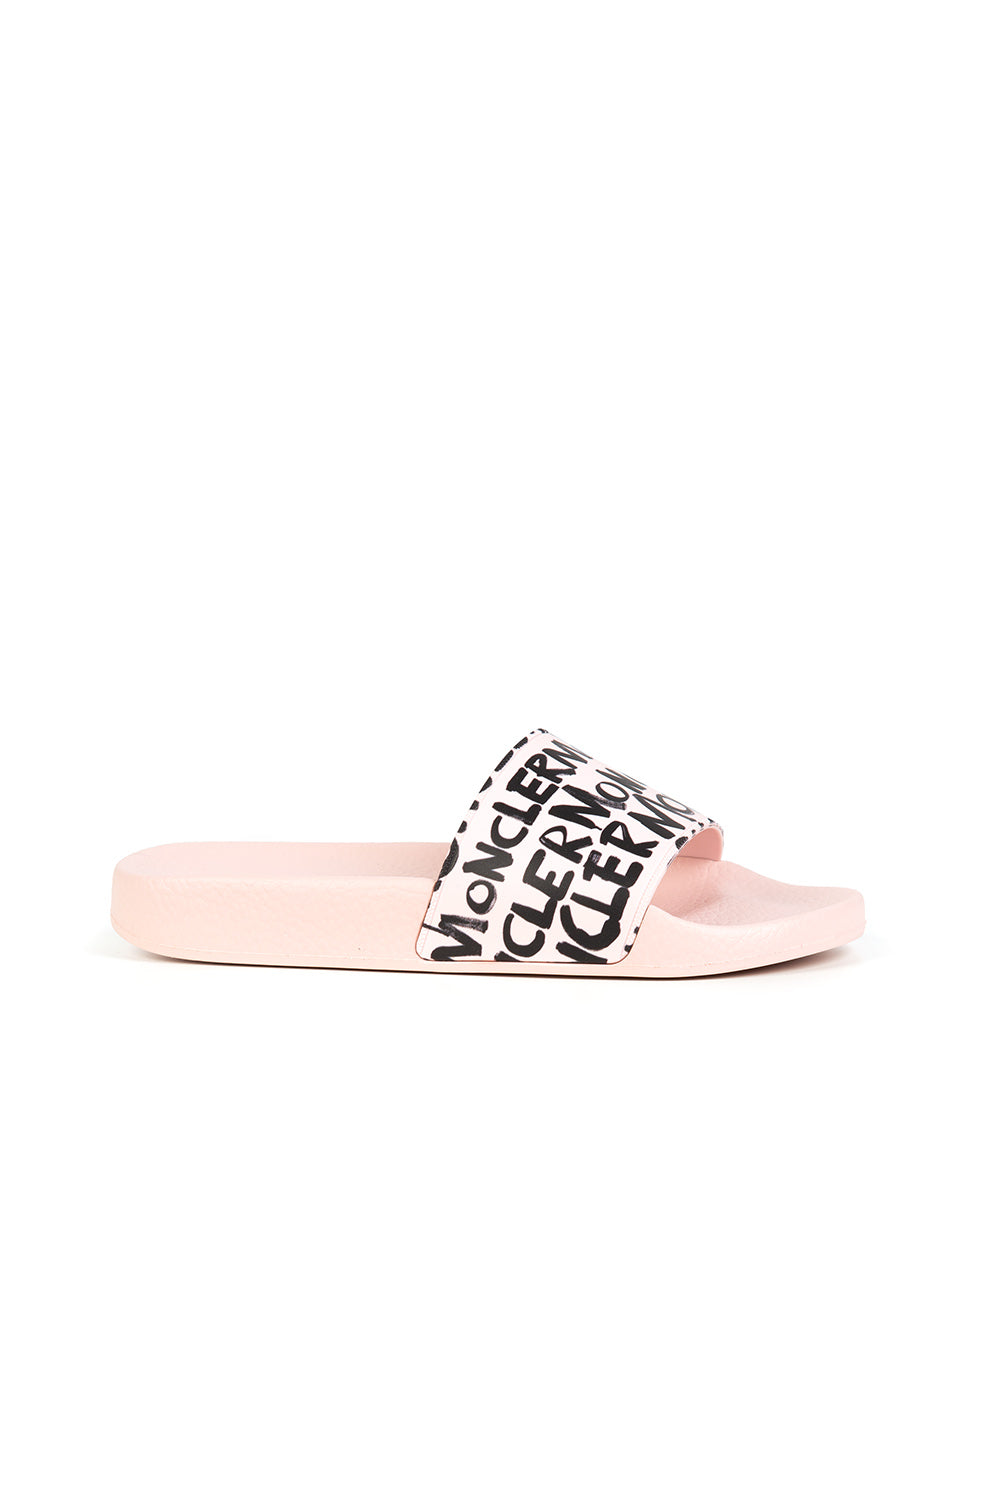 Moncler Jeanne Women’s Sandals Pink - Side View